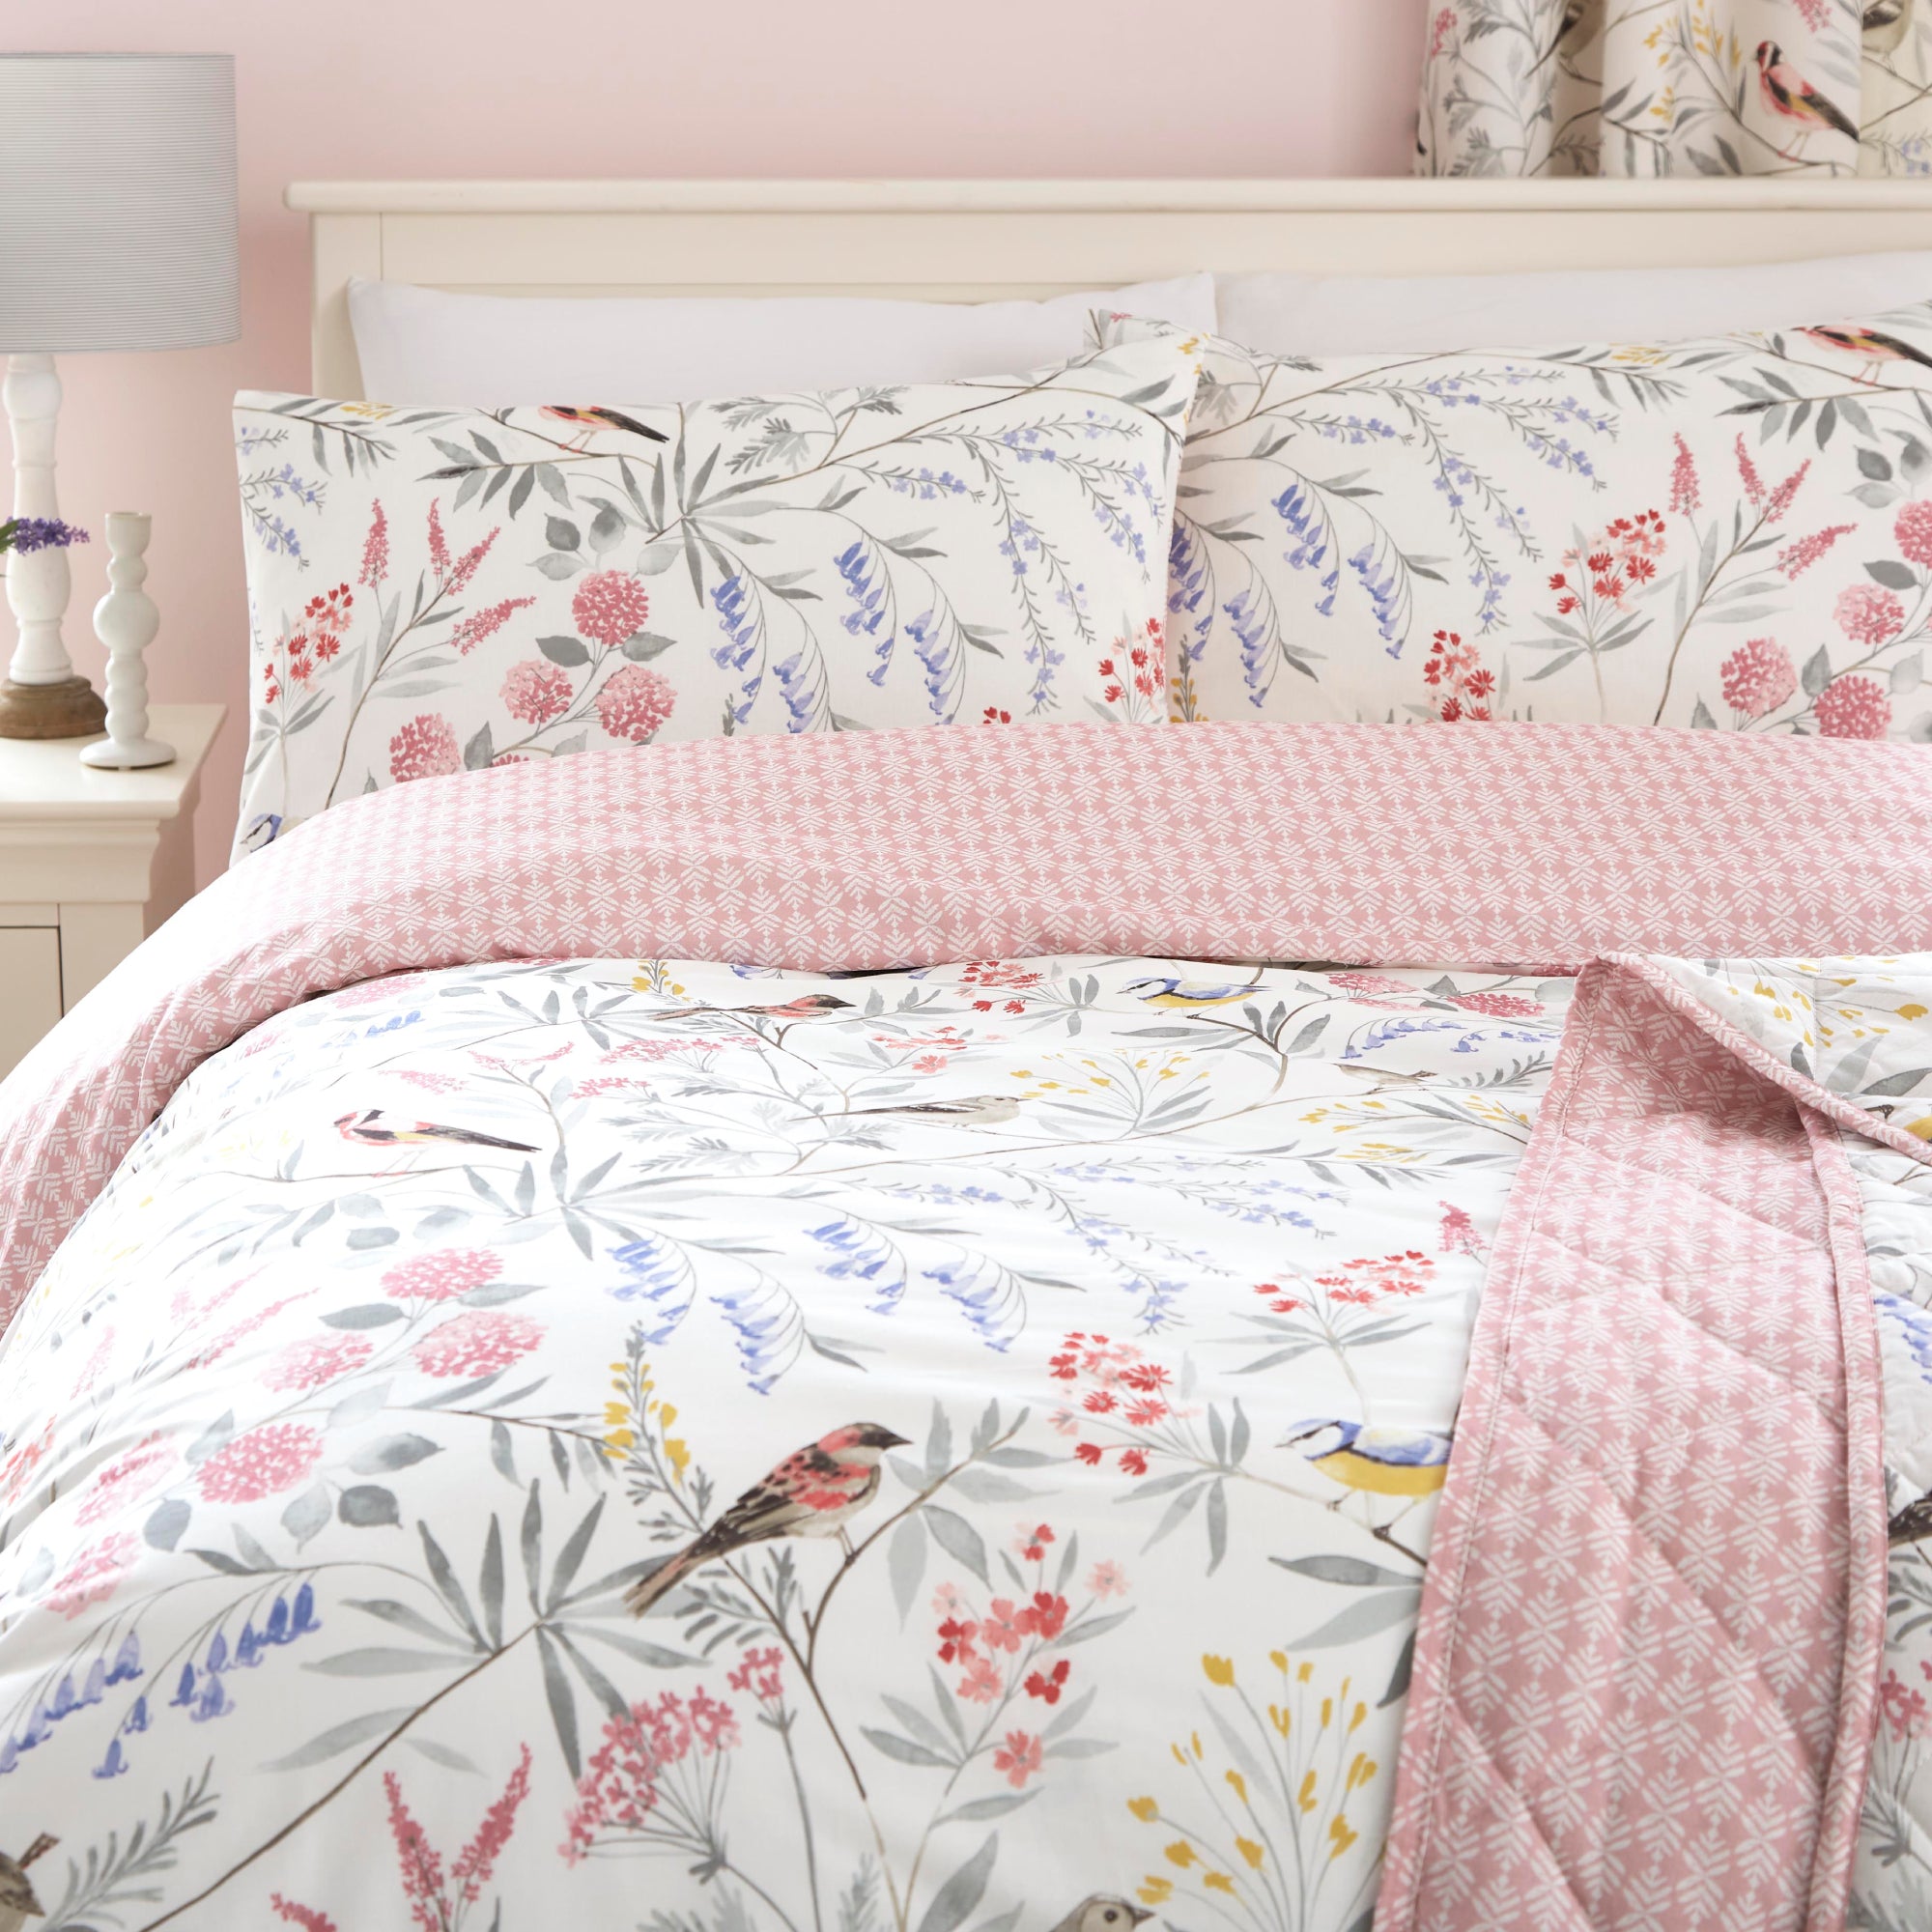 Duvet Cover Set Caraway by Dreams & Drapes Design in Pink